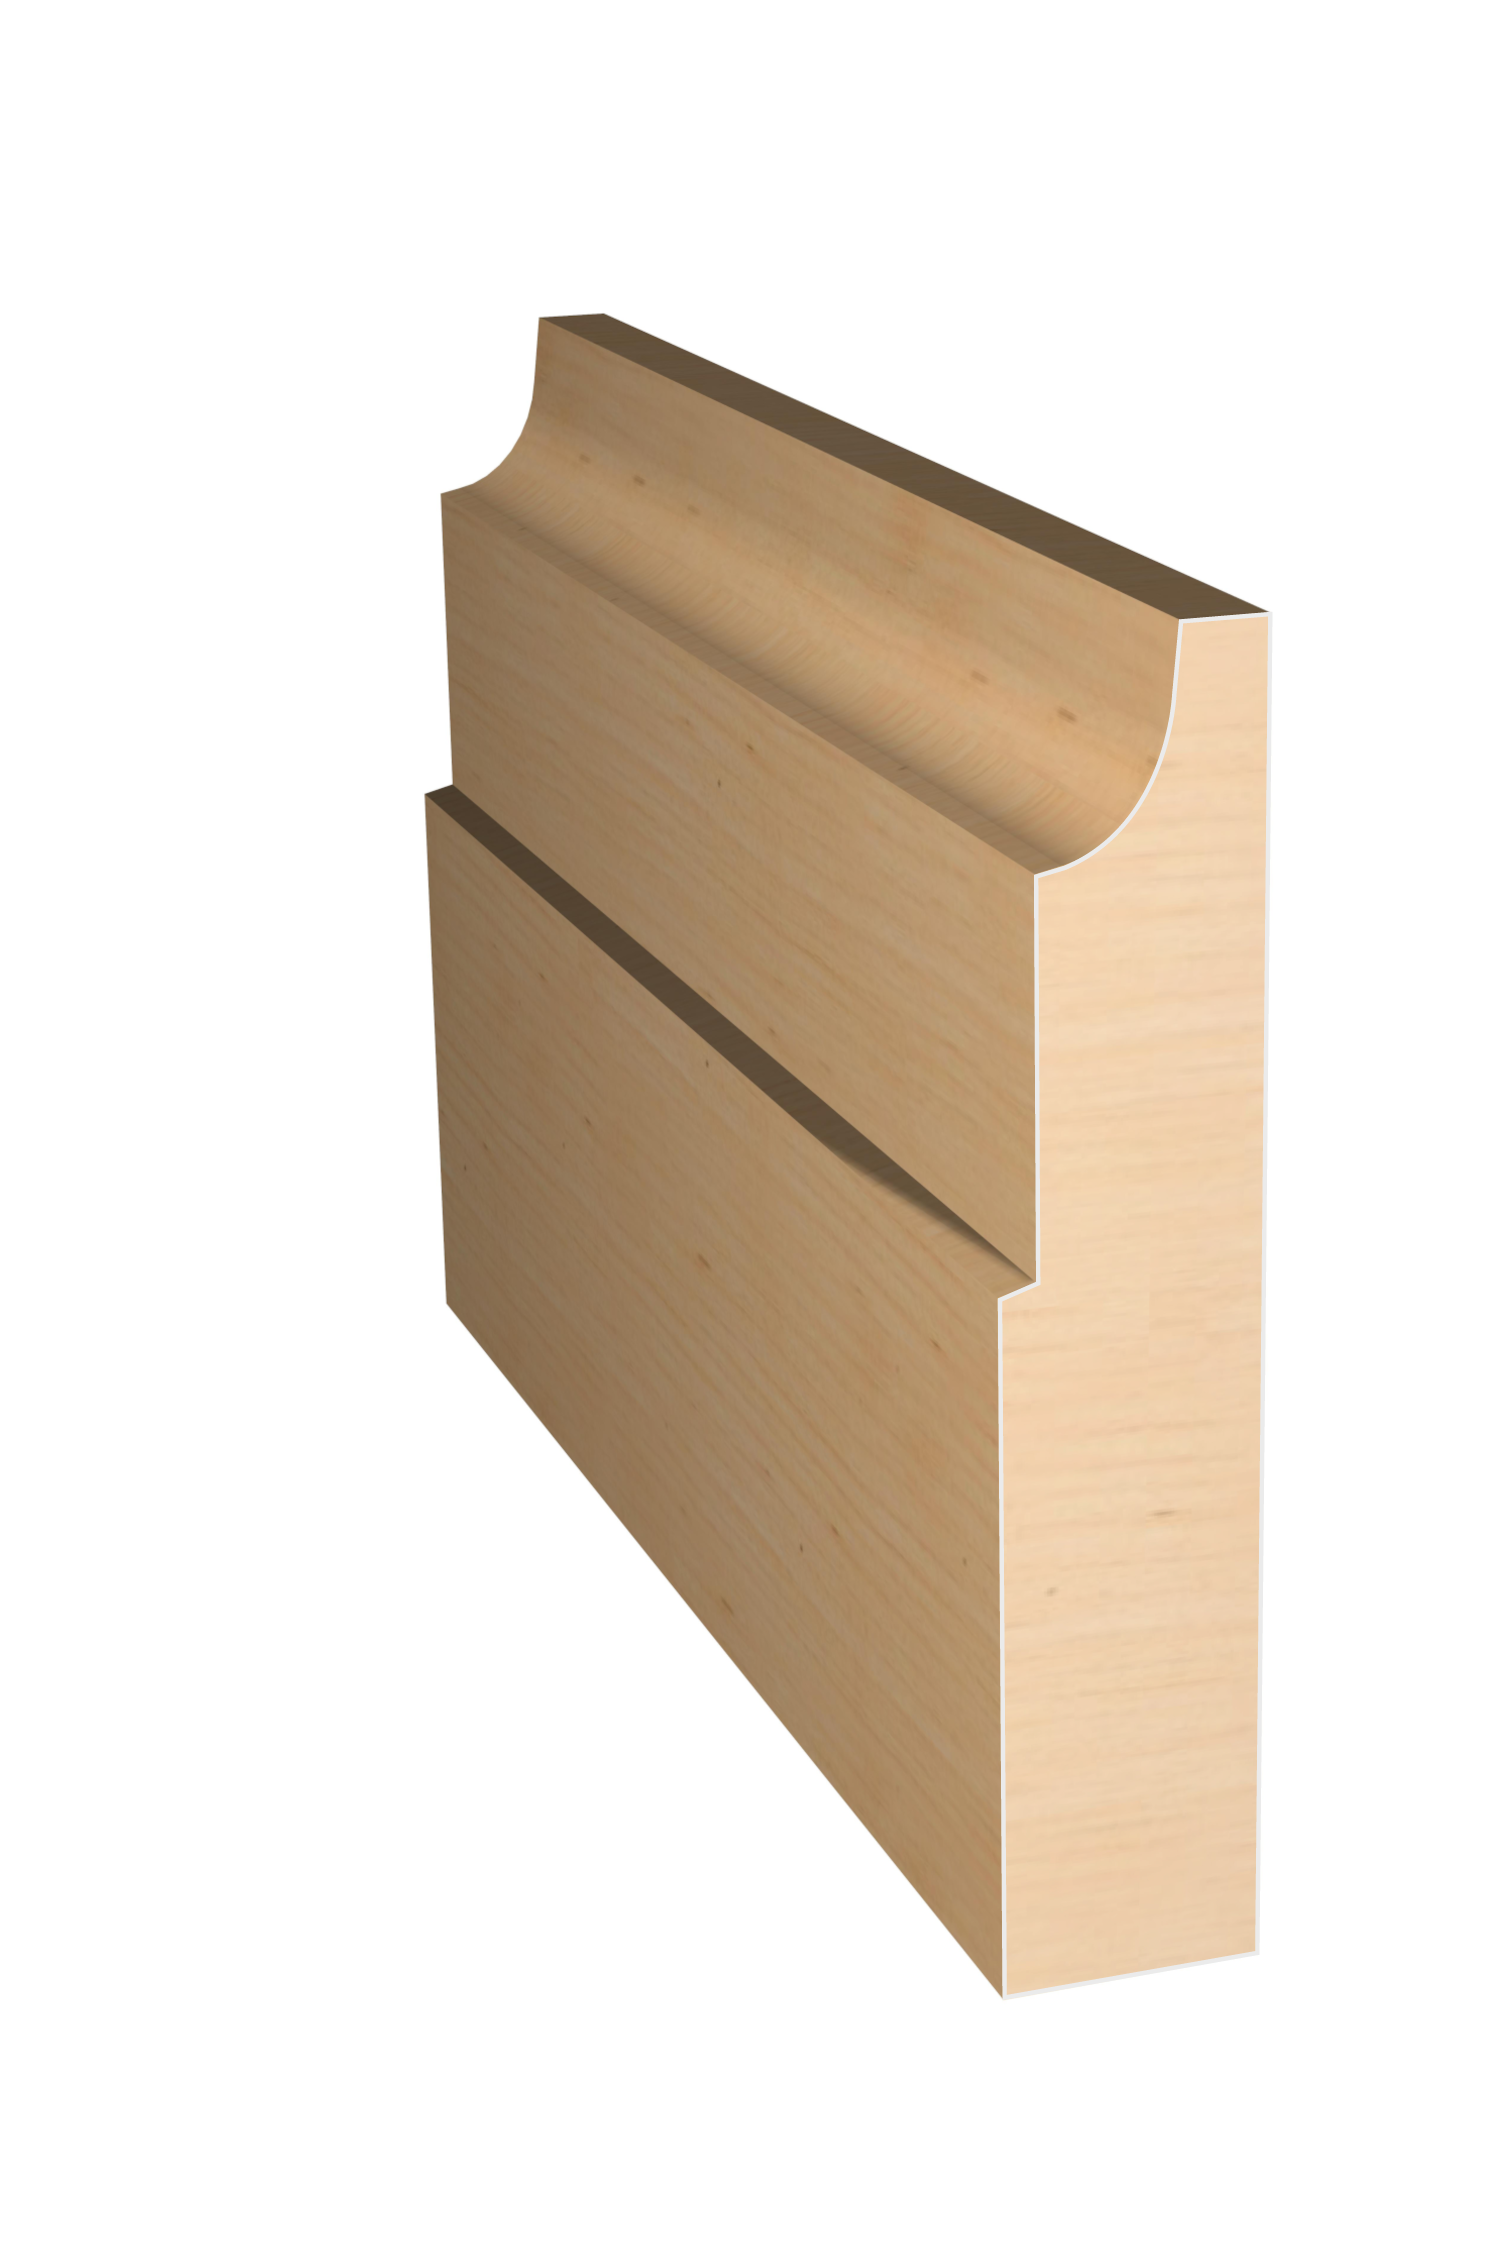 Three dimensional rendering of custom casing wood molding CAPL3348 made by Public Lumber Company in Detroit.